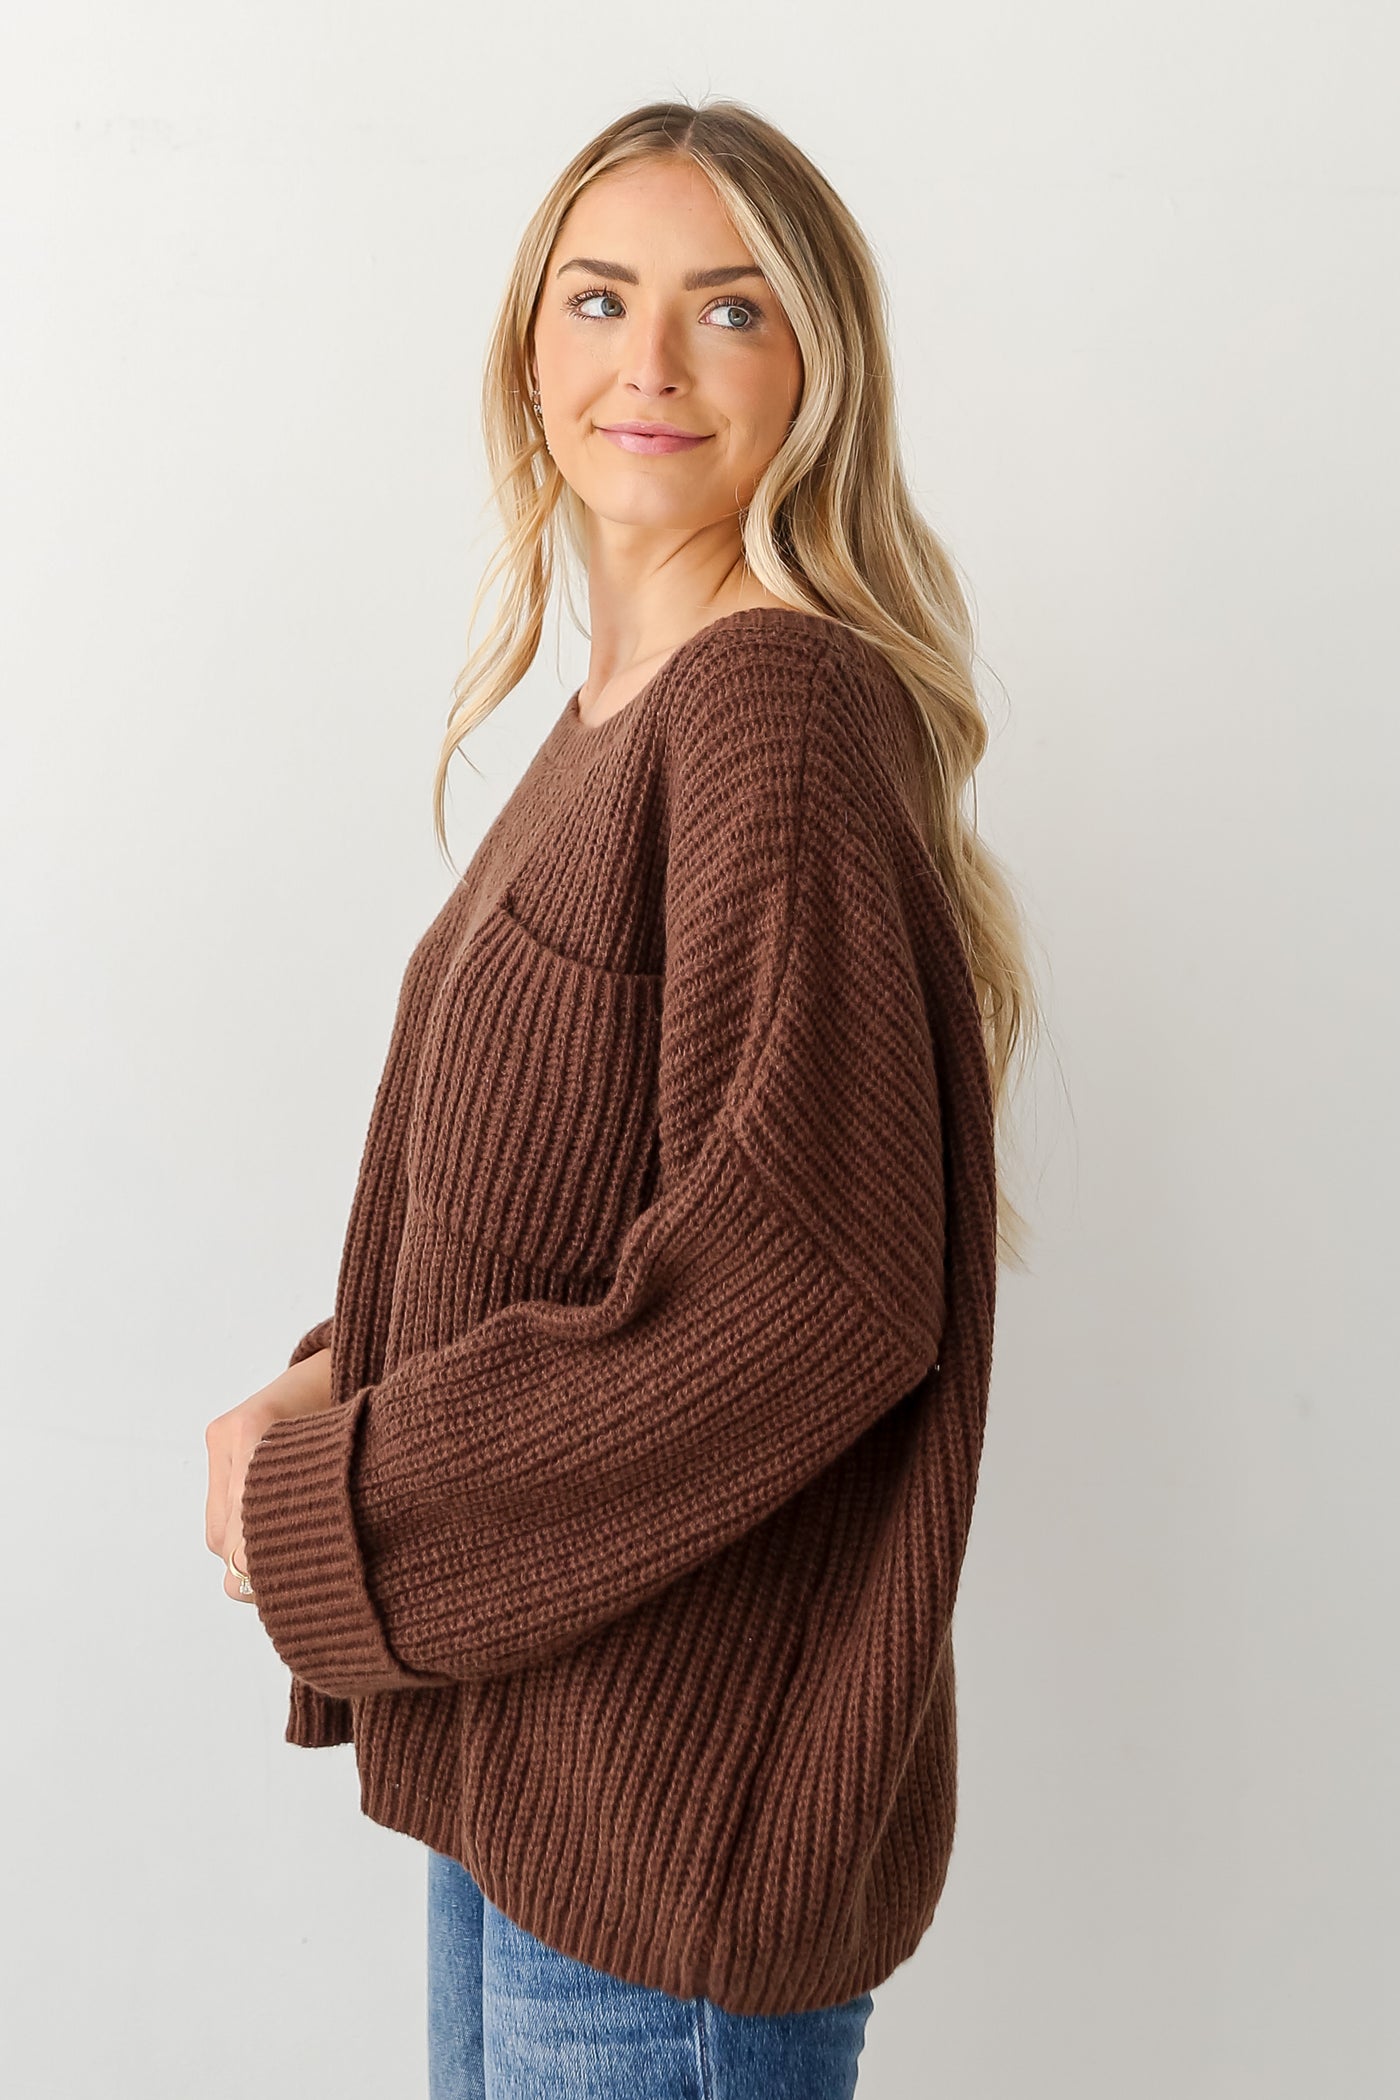 Oversized Sweaters for women